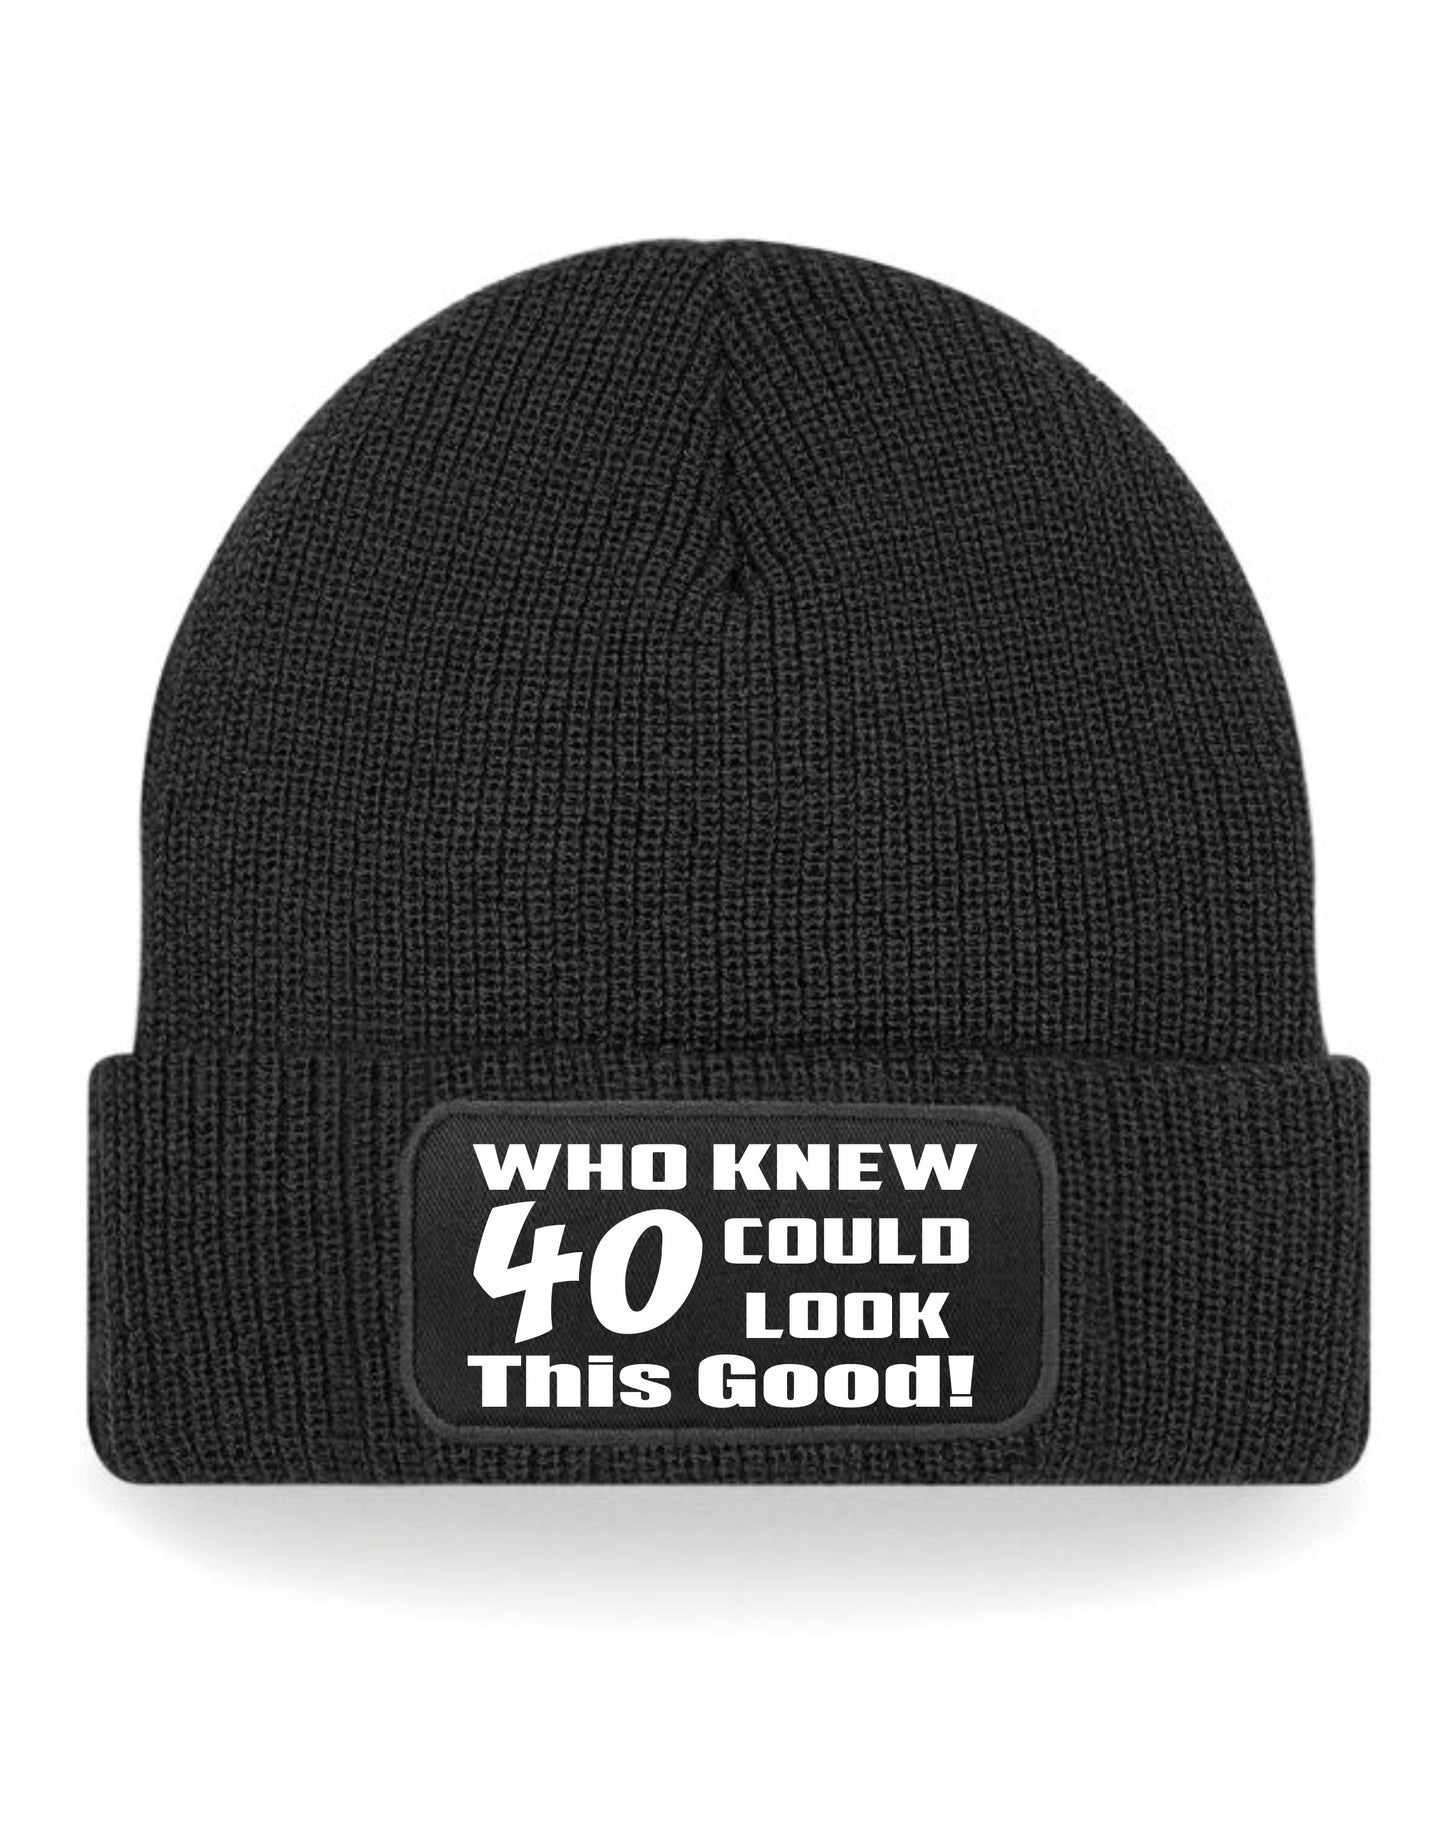 Who Knew 40 Could Look This Good Beanie Hat 40th Birthday Gift For Men & Ladies